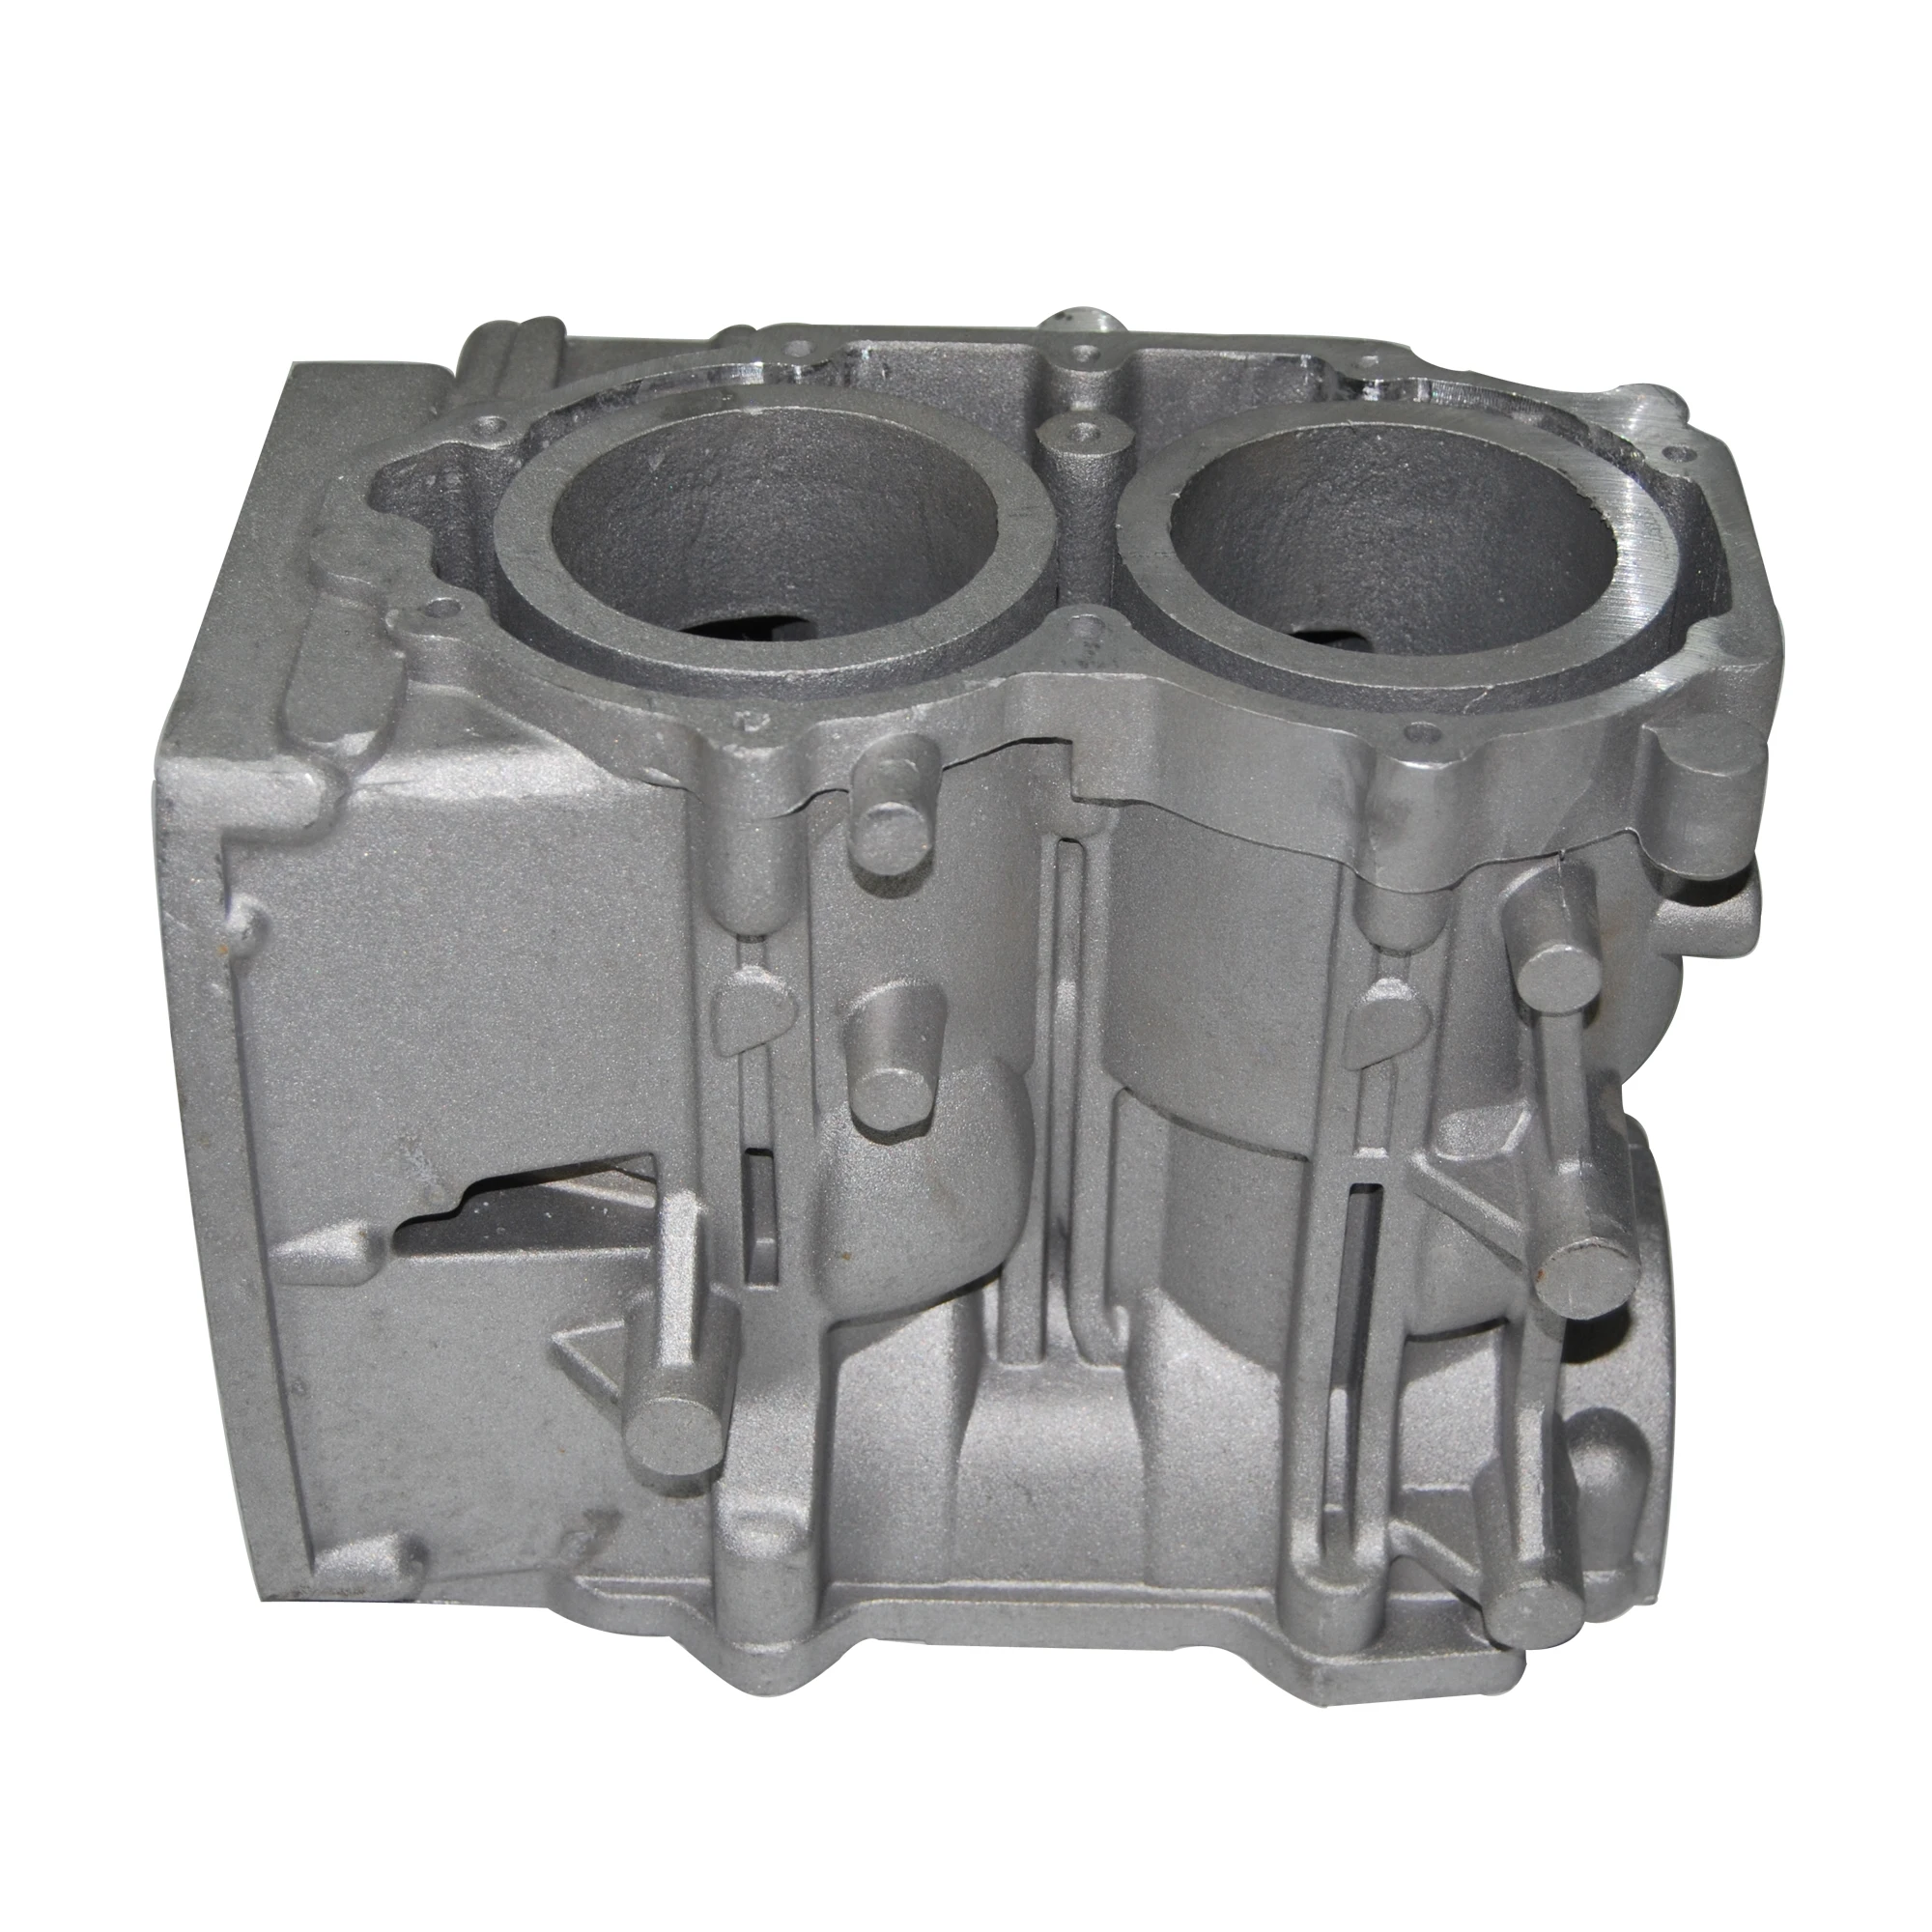 MATECH Customized Low Pressure Casting Water Pump Parts(图12)